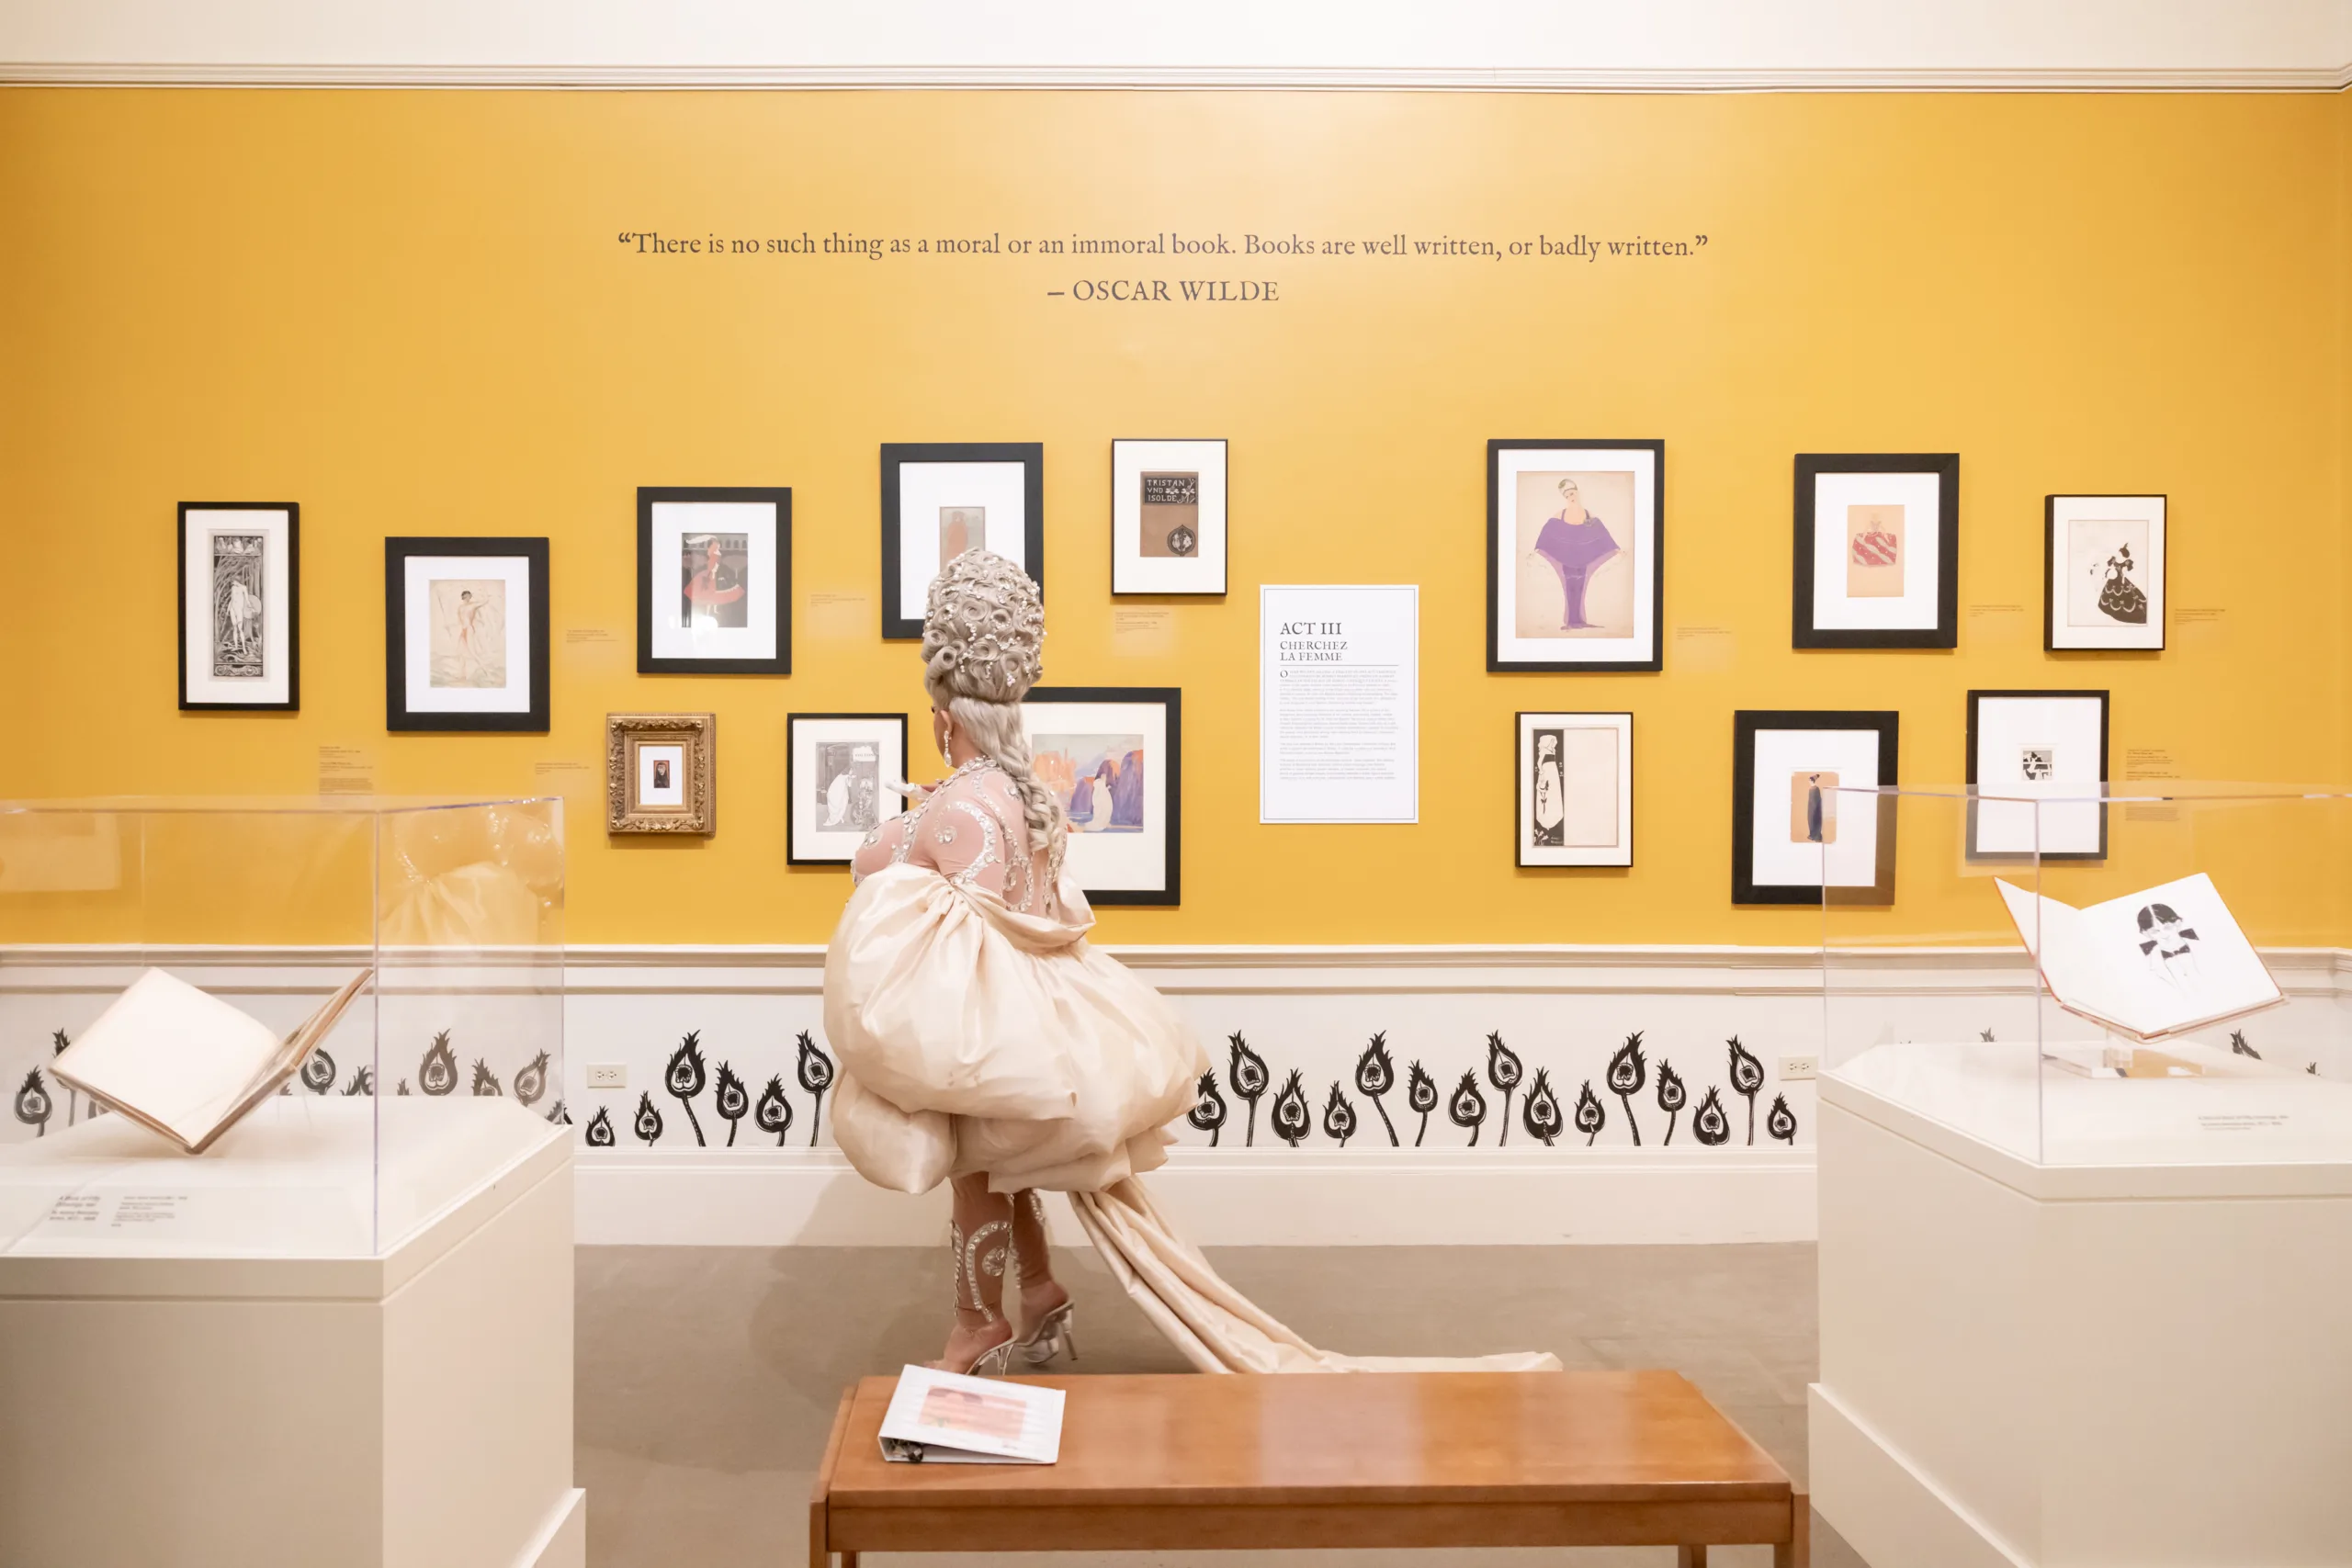 An art gallery with a yellow wall hung with small framed works. A patron dressed in a sumptuous 18th-century inspired outfit views the works.